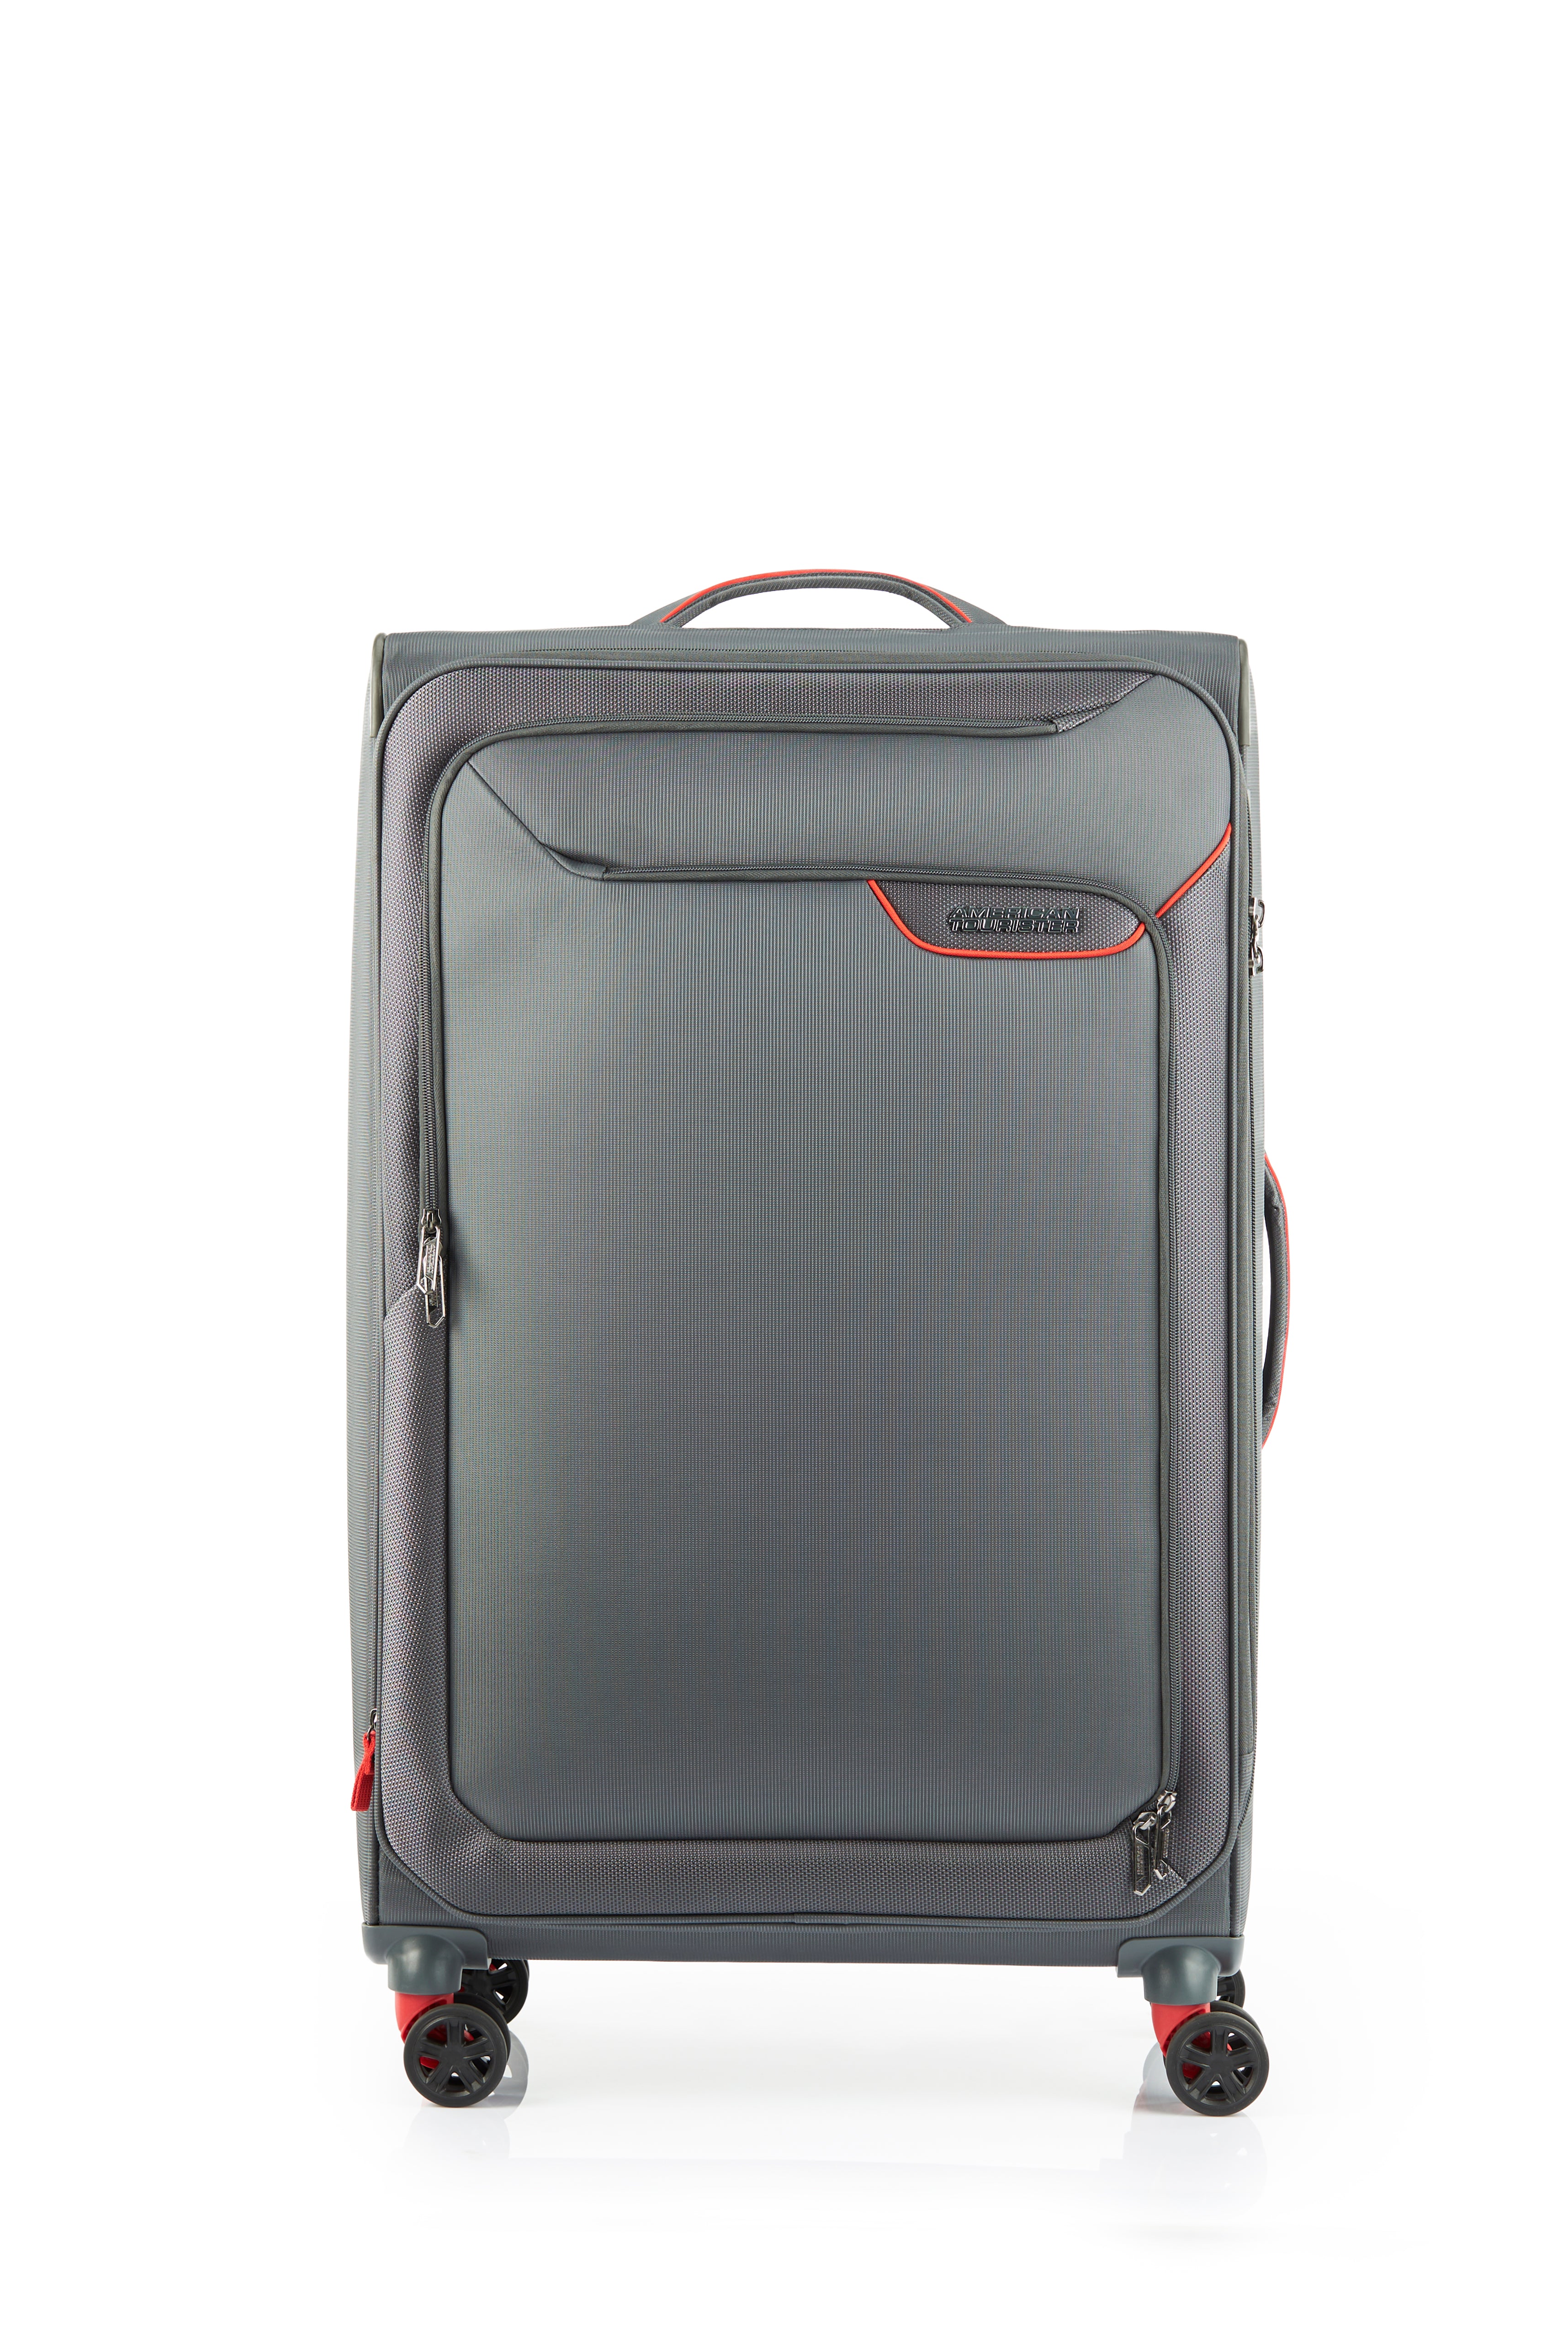 American Tourister - Applite ECO 82cm Large Suitcase - Grey/Red-2